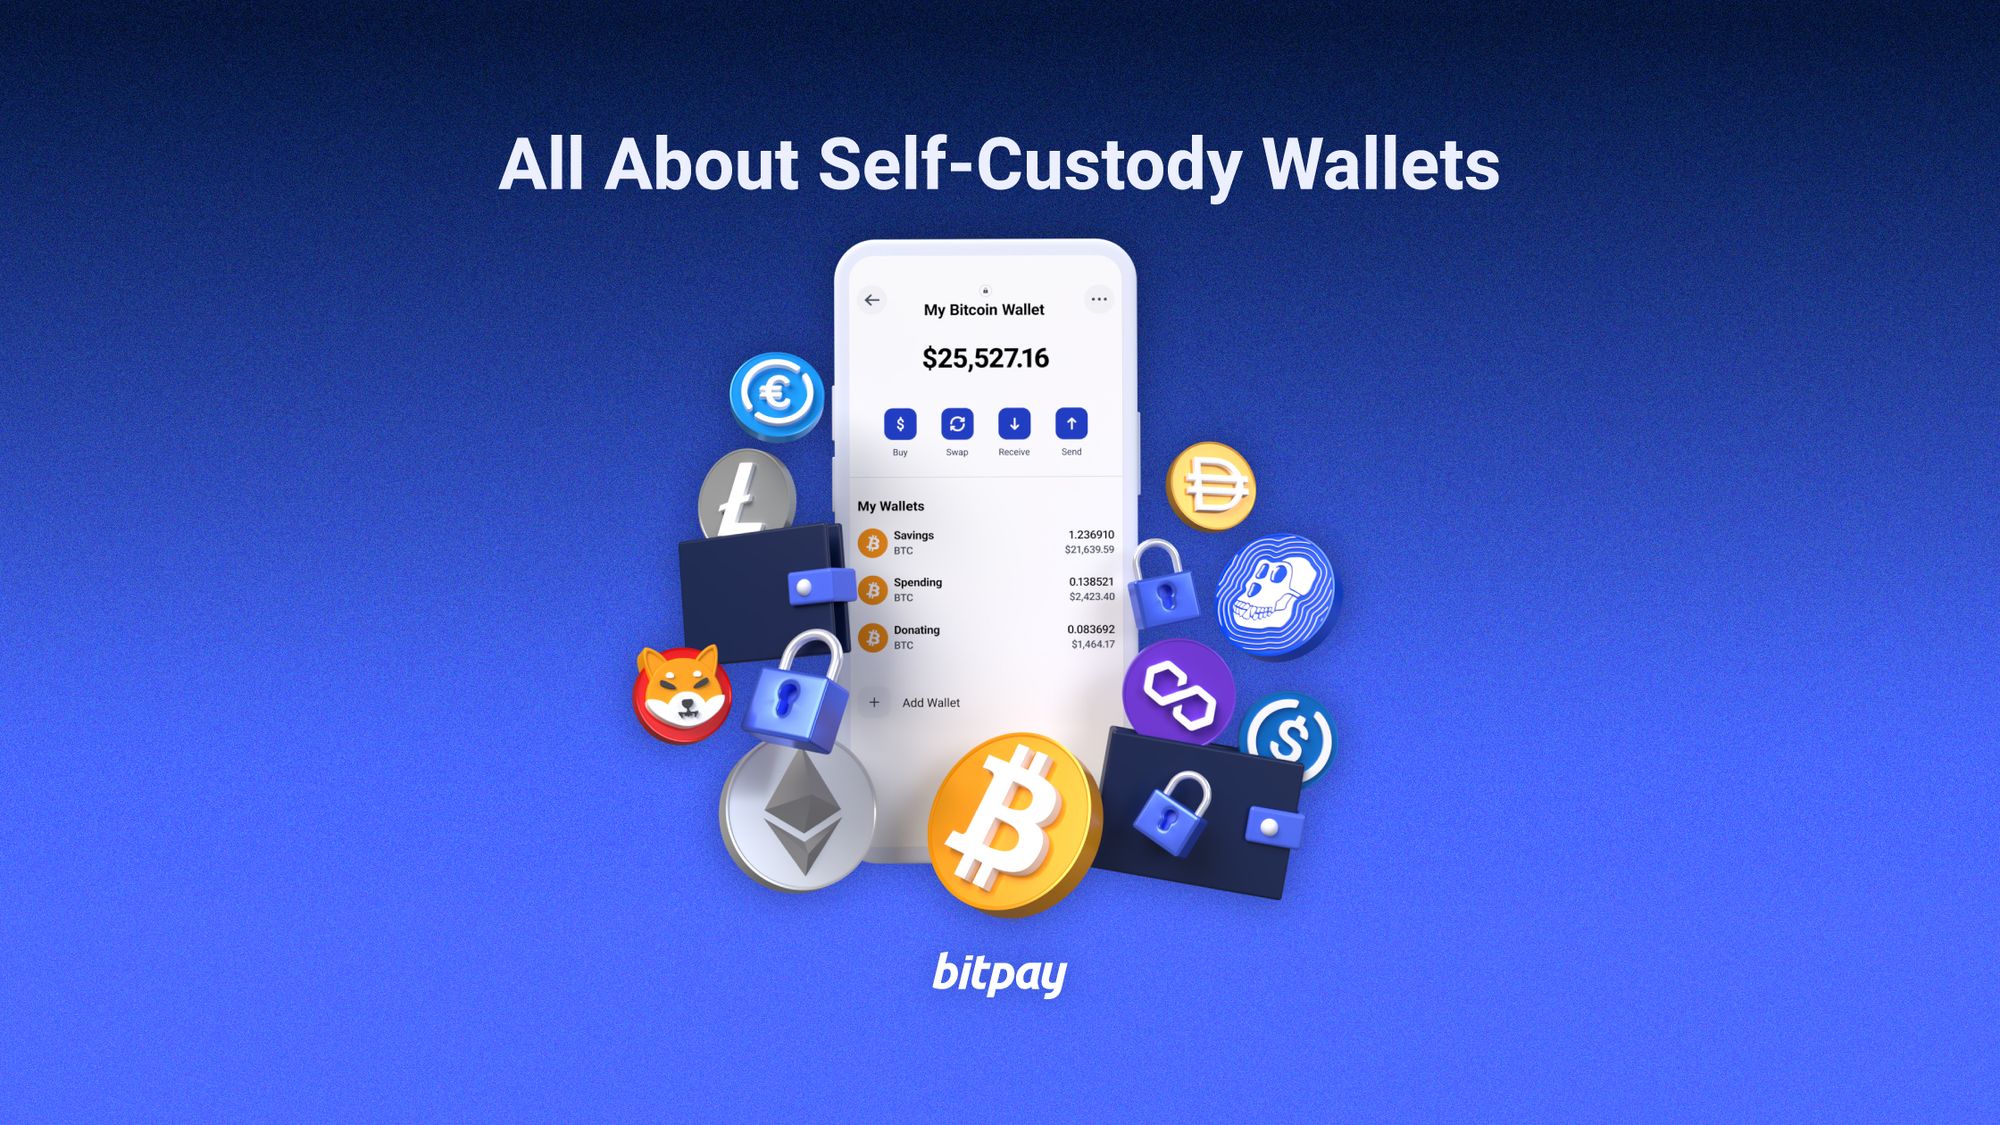 What Is a Self-Custody Wallet? How Do I Take Control of My Crypto and Keys?